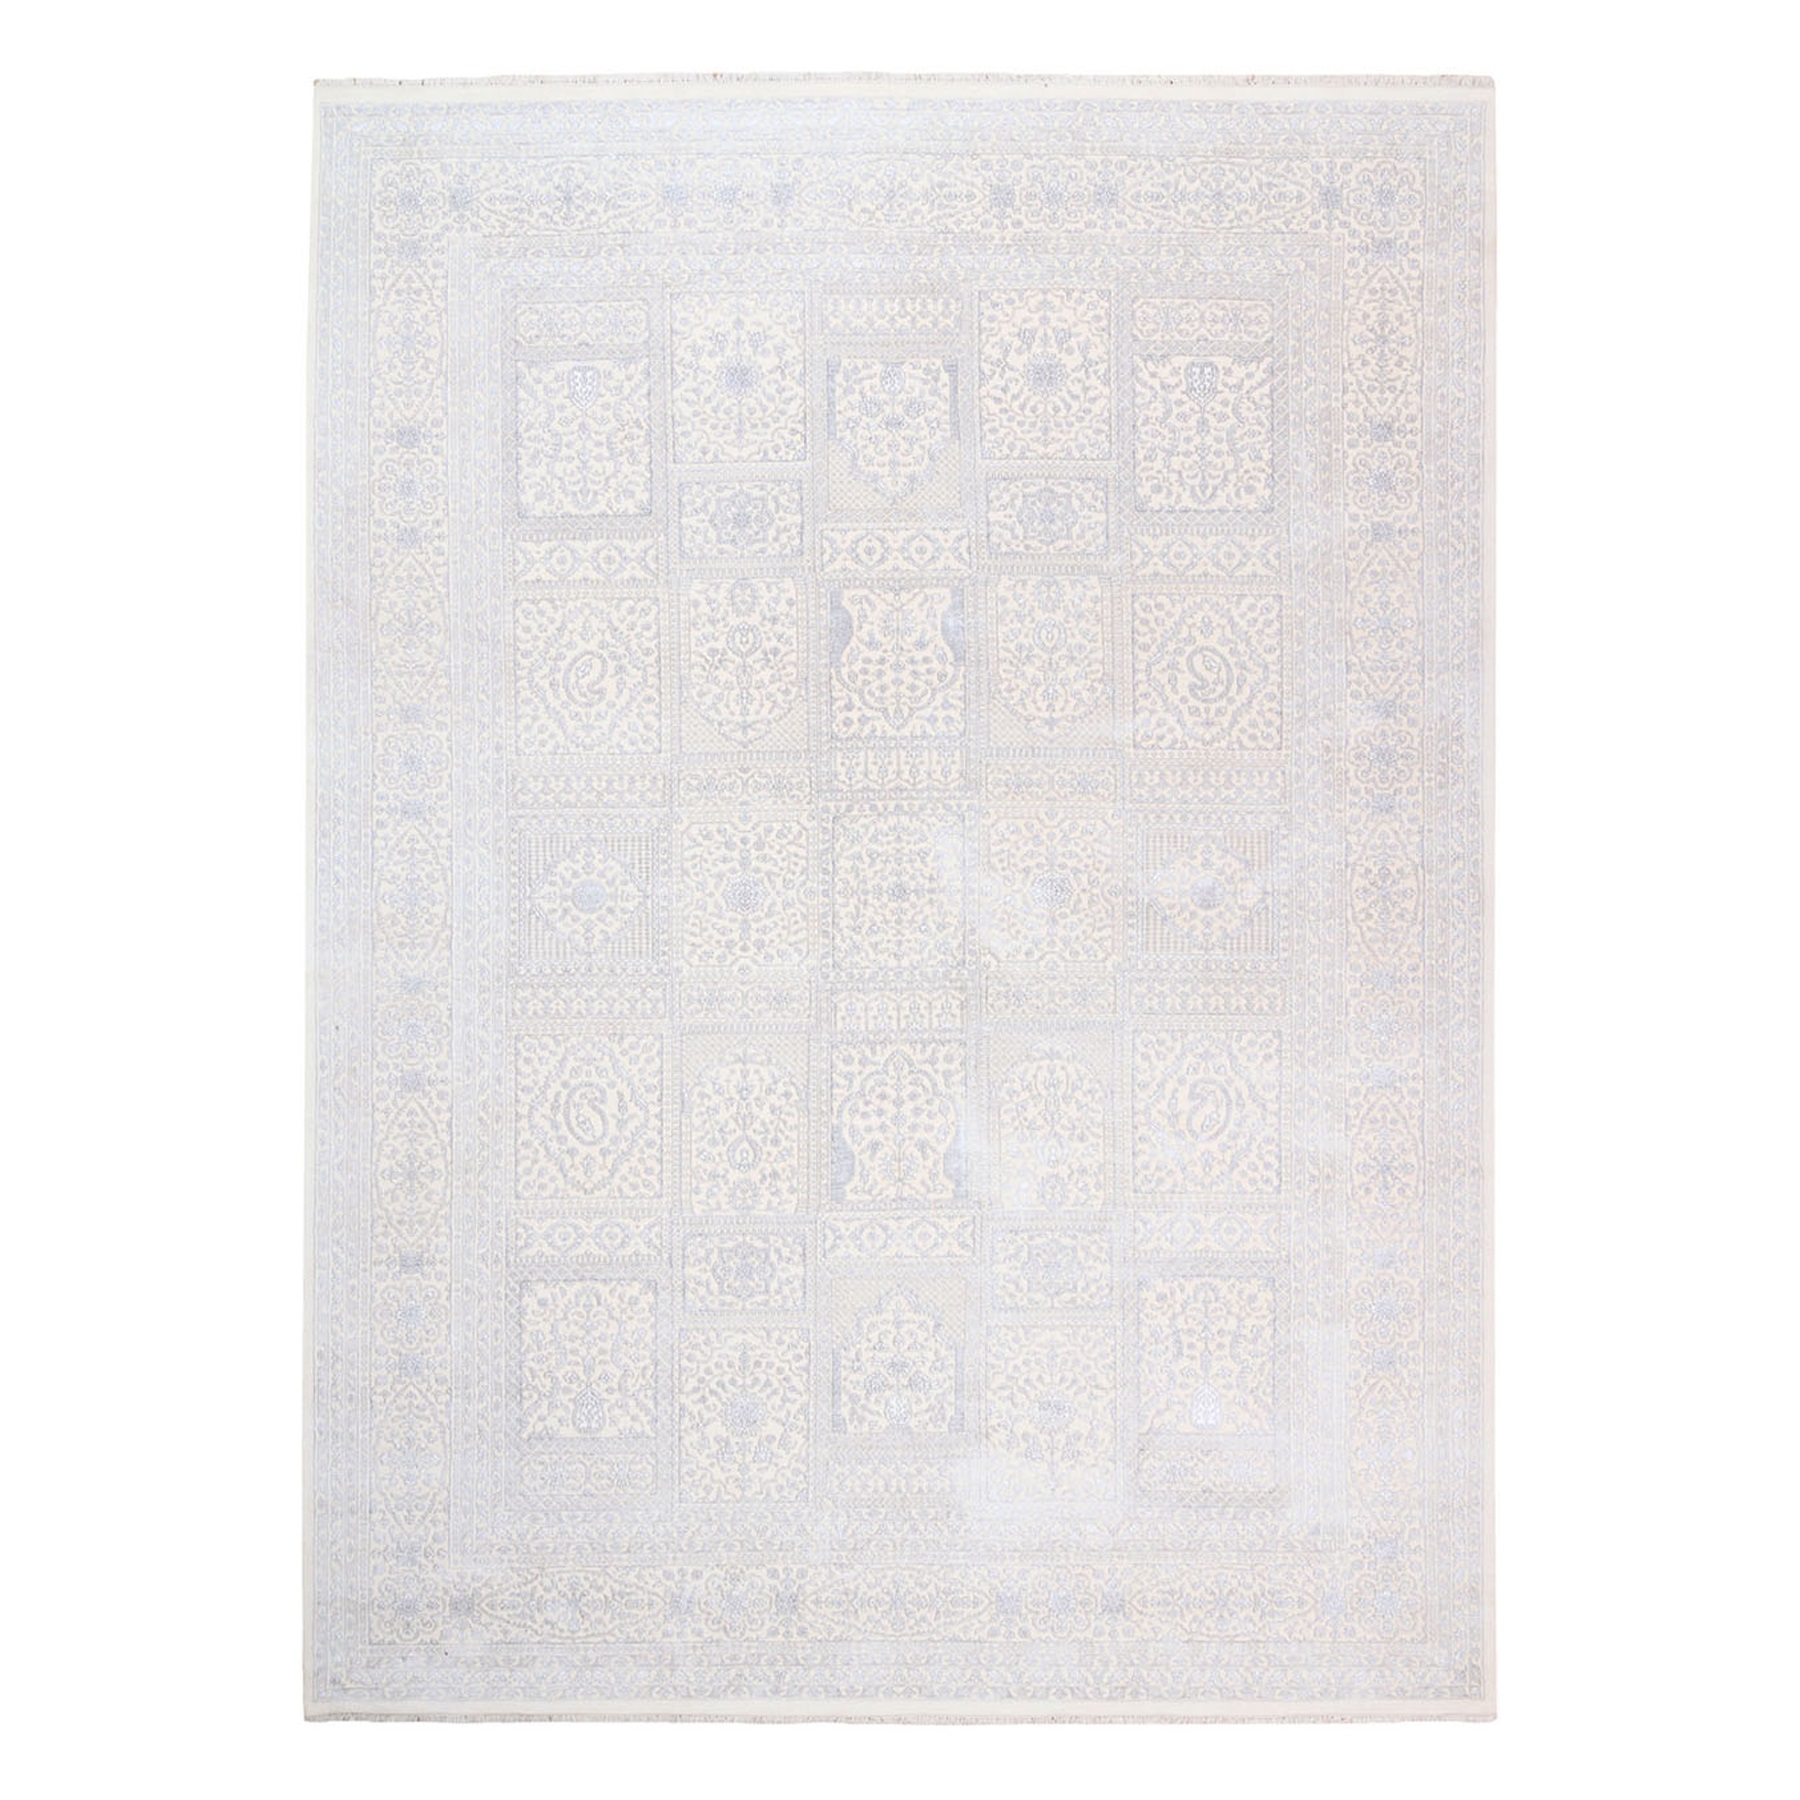 Pirniakan Collection Hand Knotted Ivory Rug No: 1124486